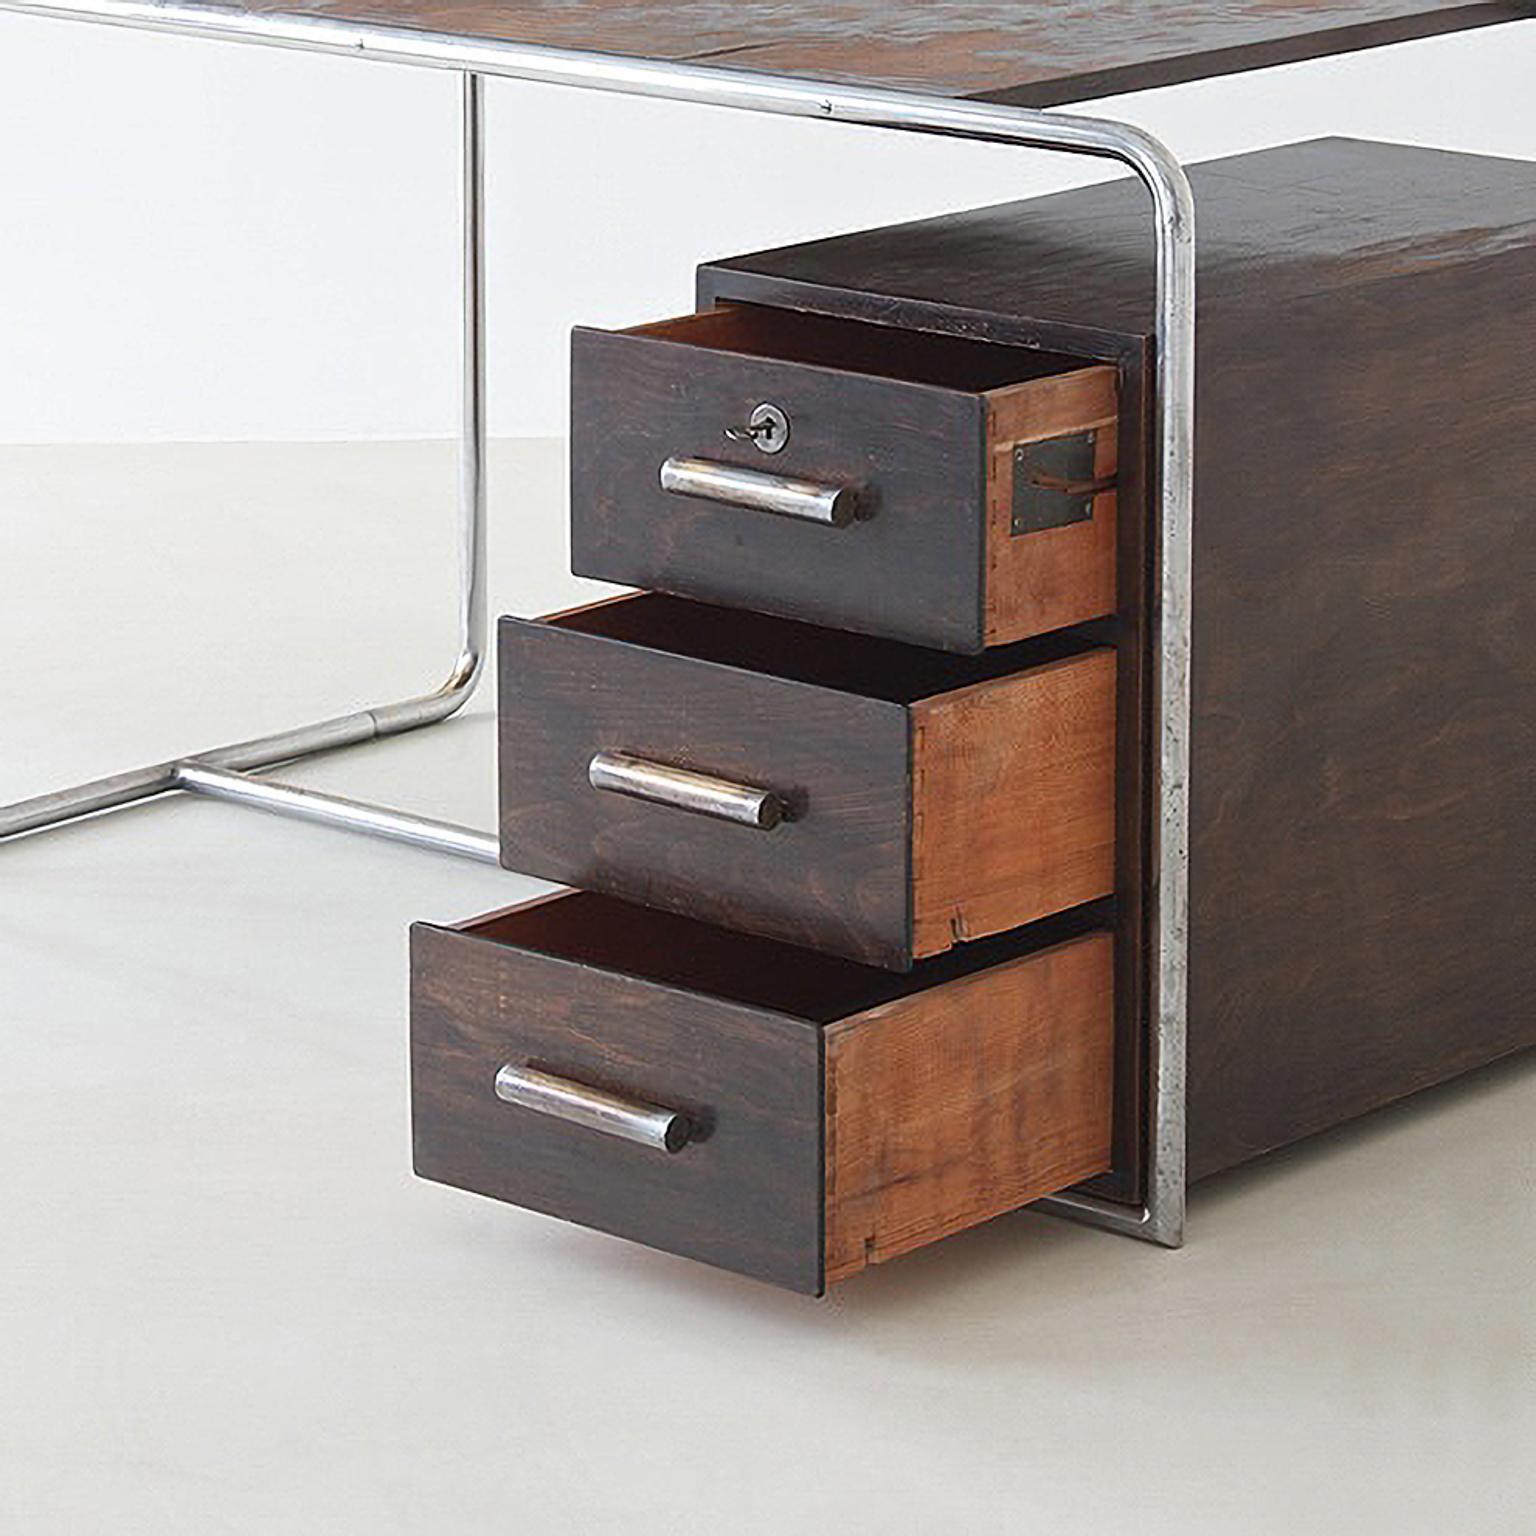 Mid-20th Century Bauhaus Tubular Steel Desk by Bruno Weil for Thonet, Stained Wood, Germany, 1930 For Sale